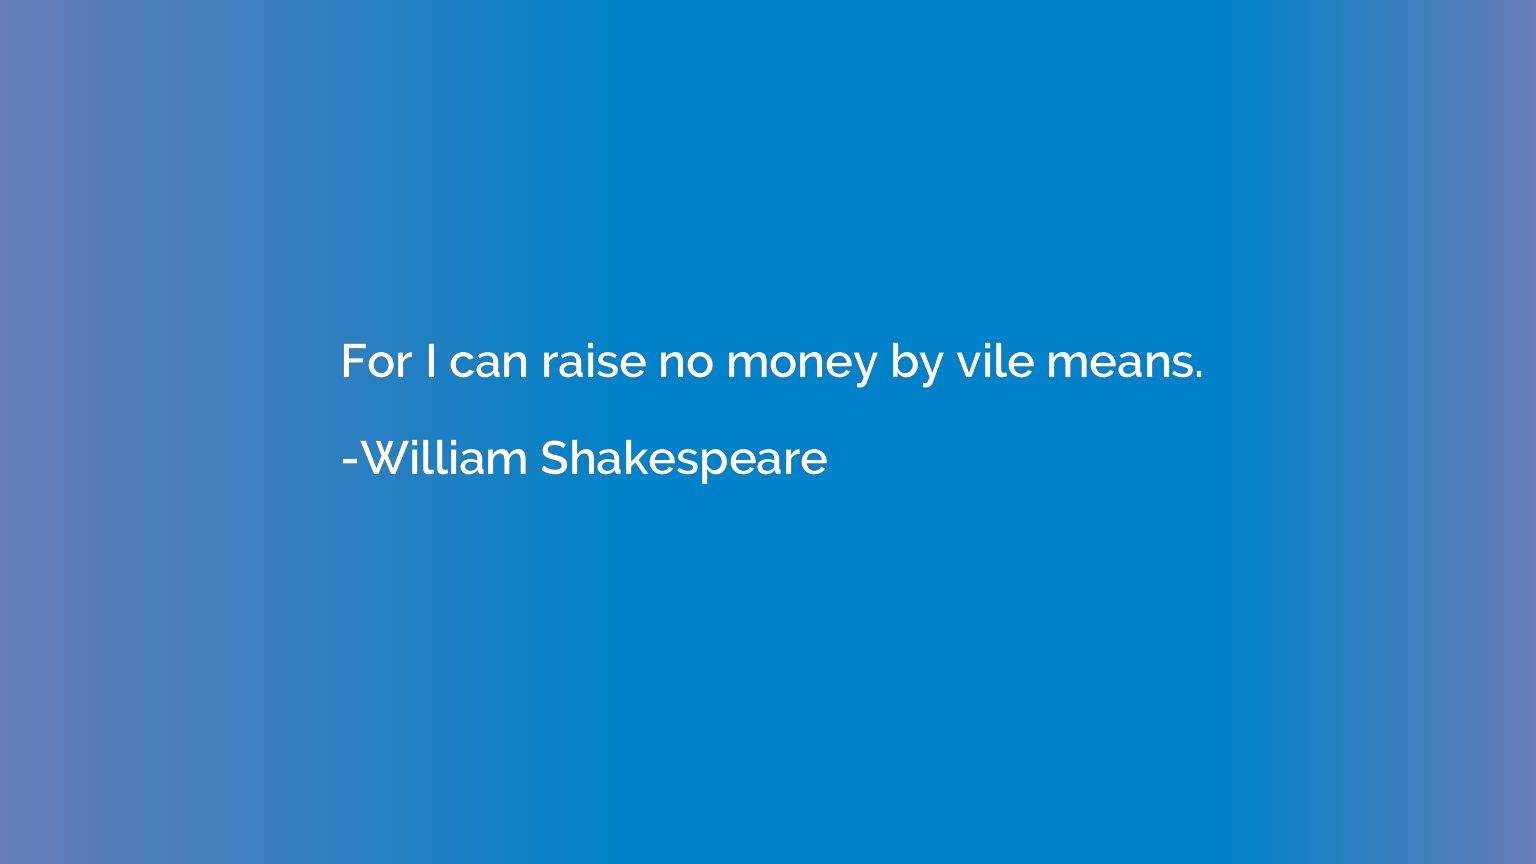 For I can raise no money by vile means.